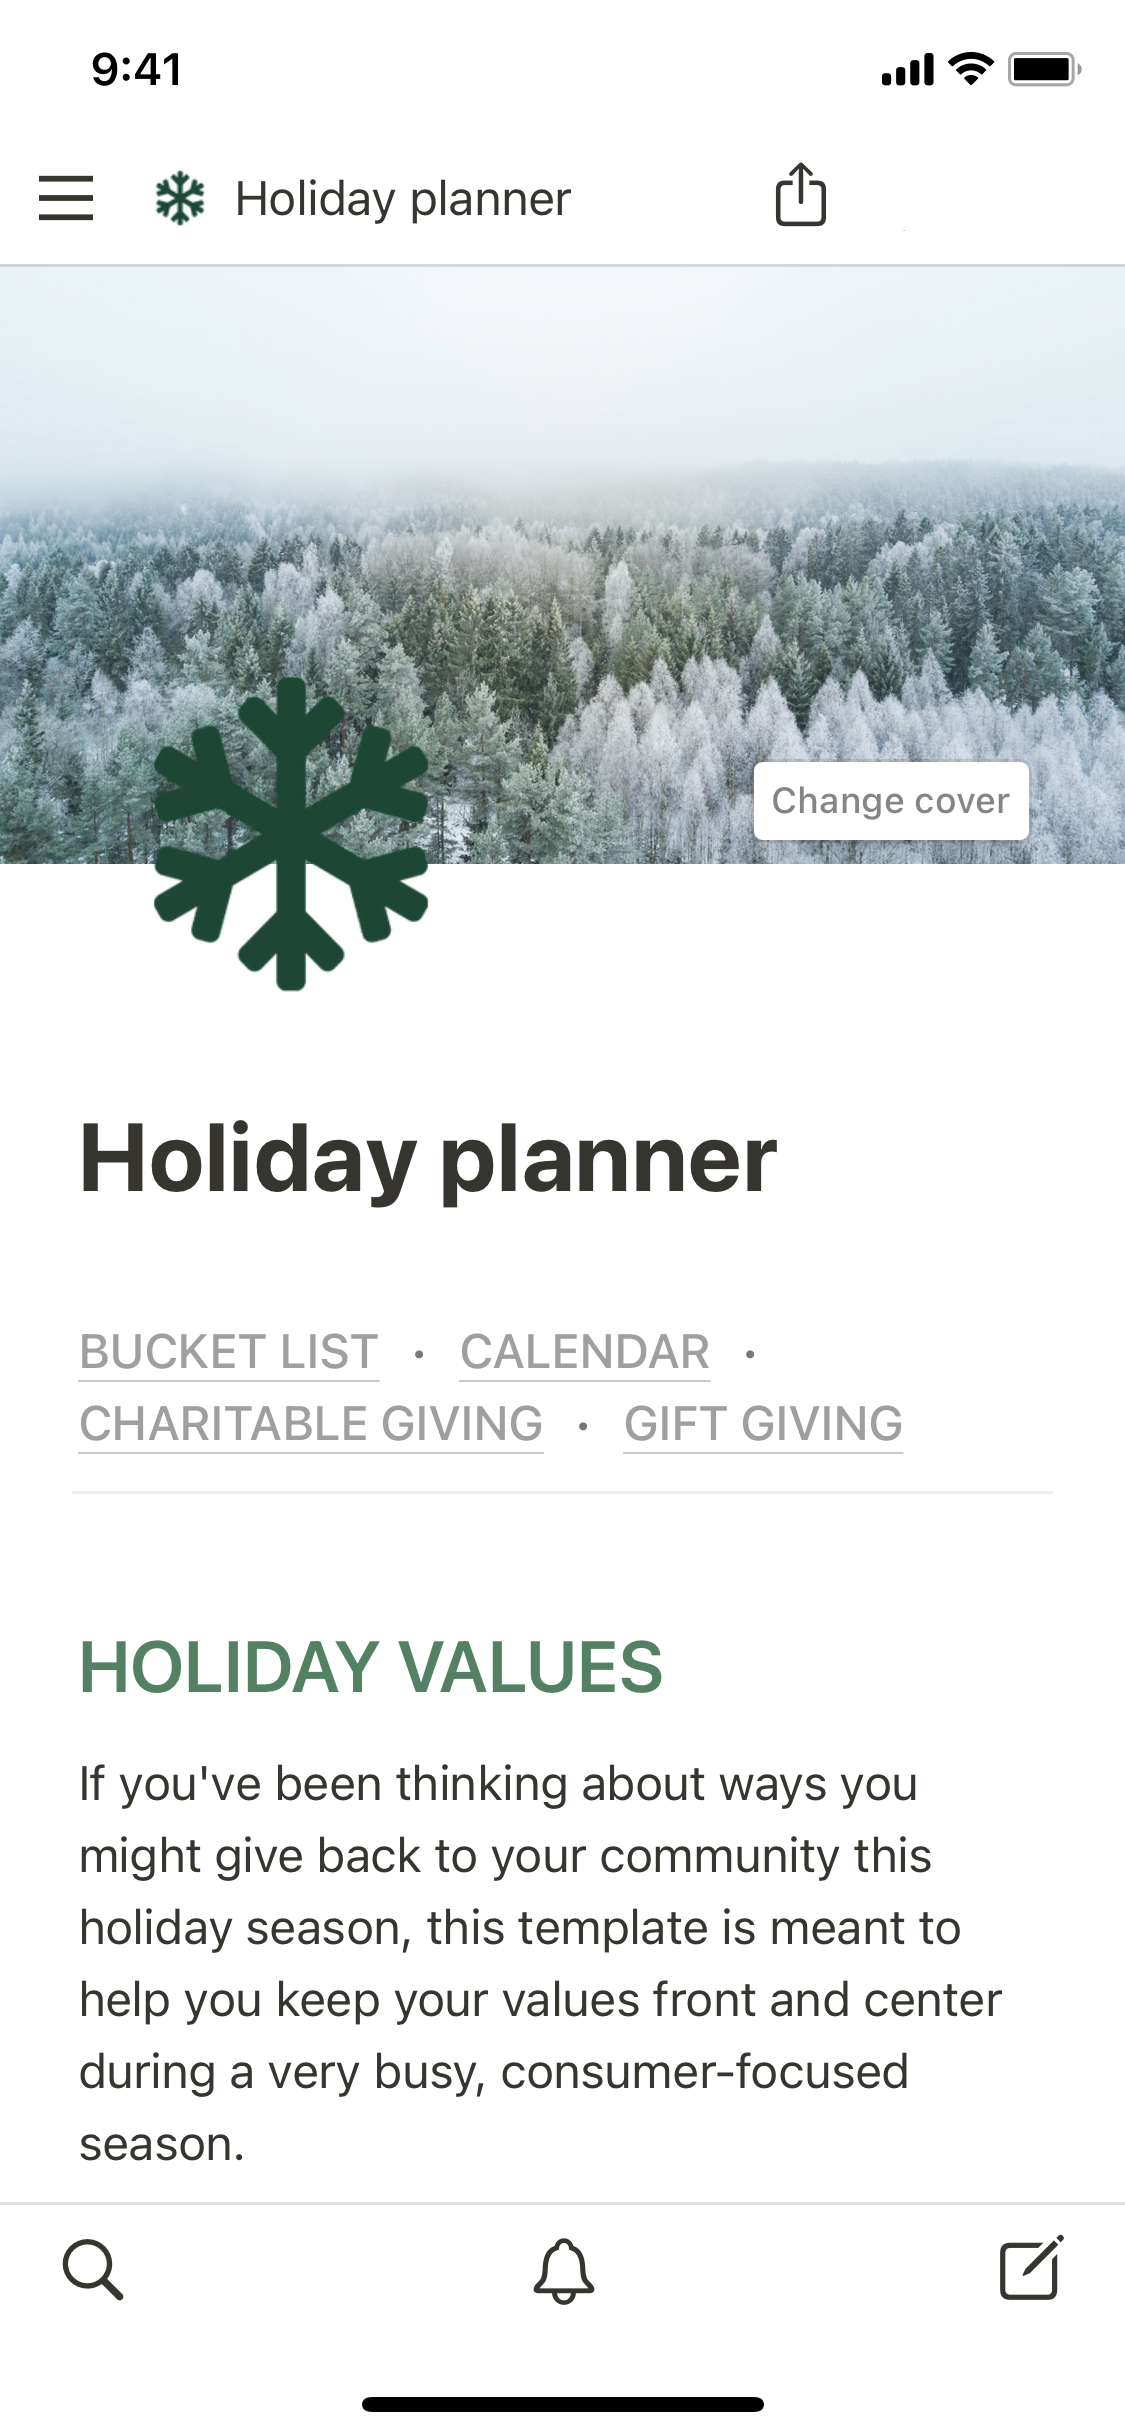 The mobile image for the Holiday planner template